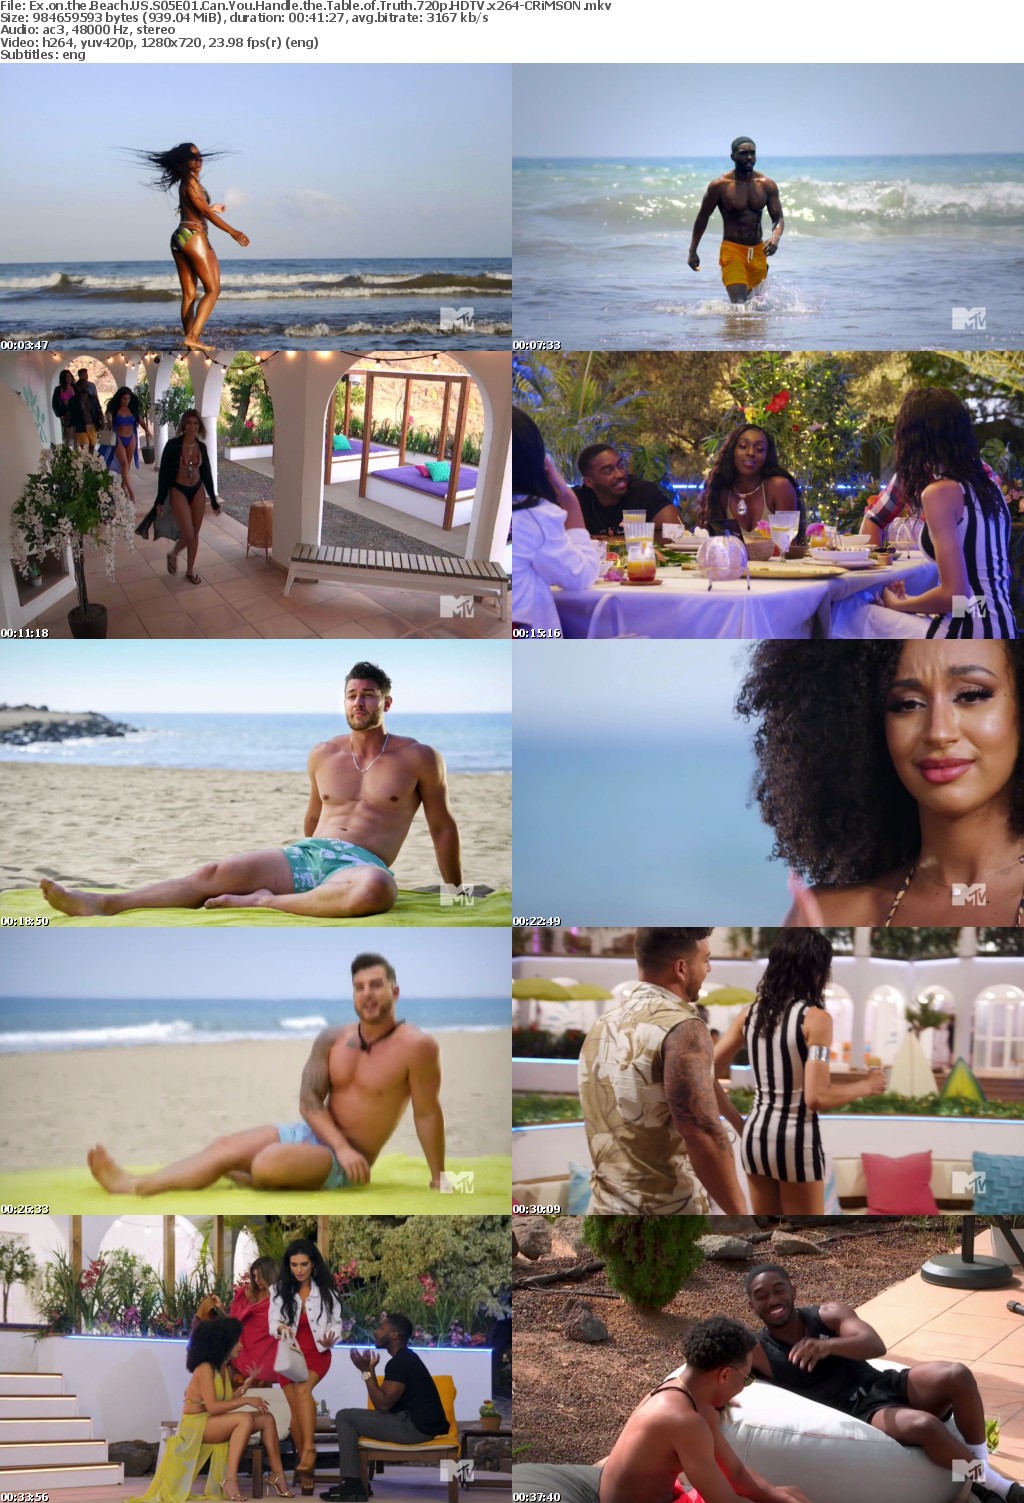 Ex on the Beach US S05E01 Can You Handle the Table of Truth 720p HDTV x264-CRiMSON